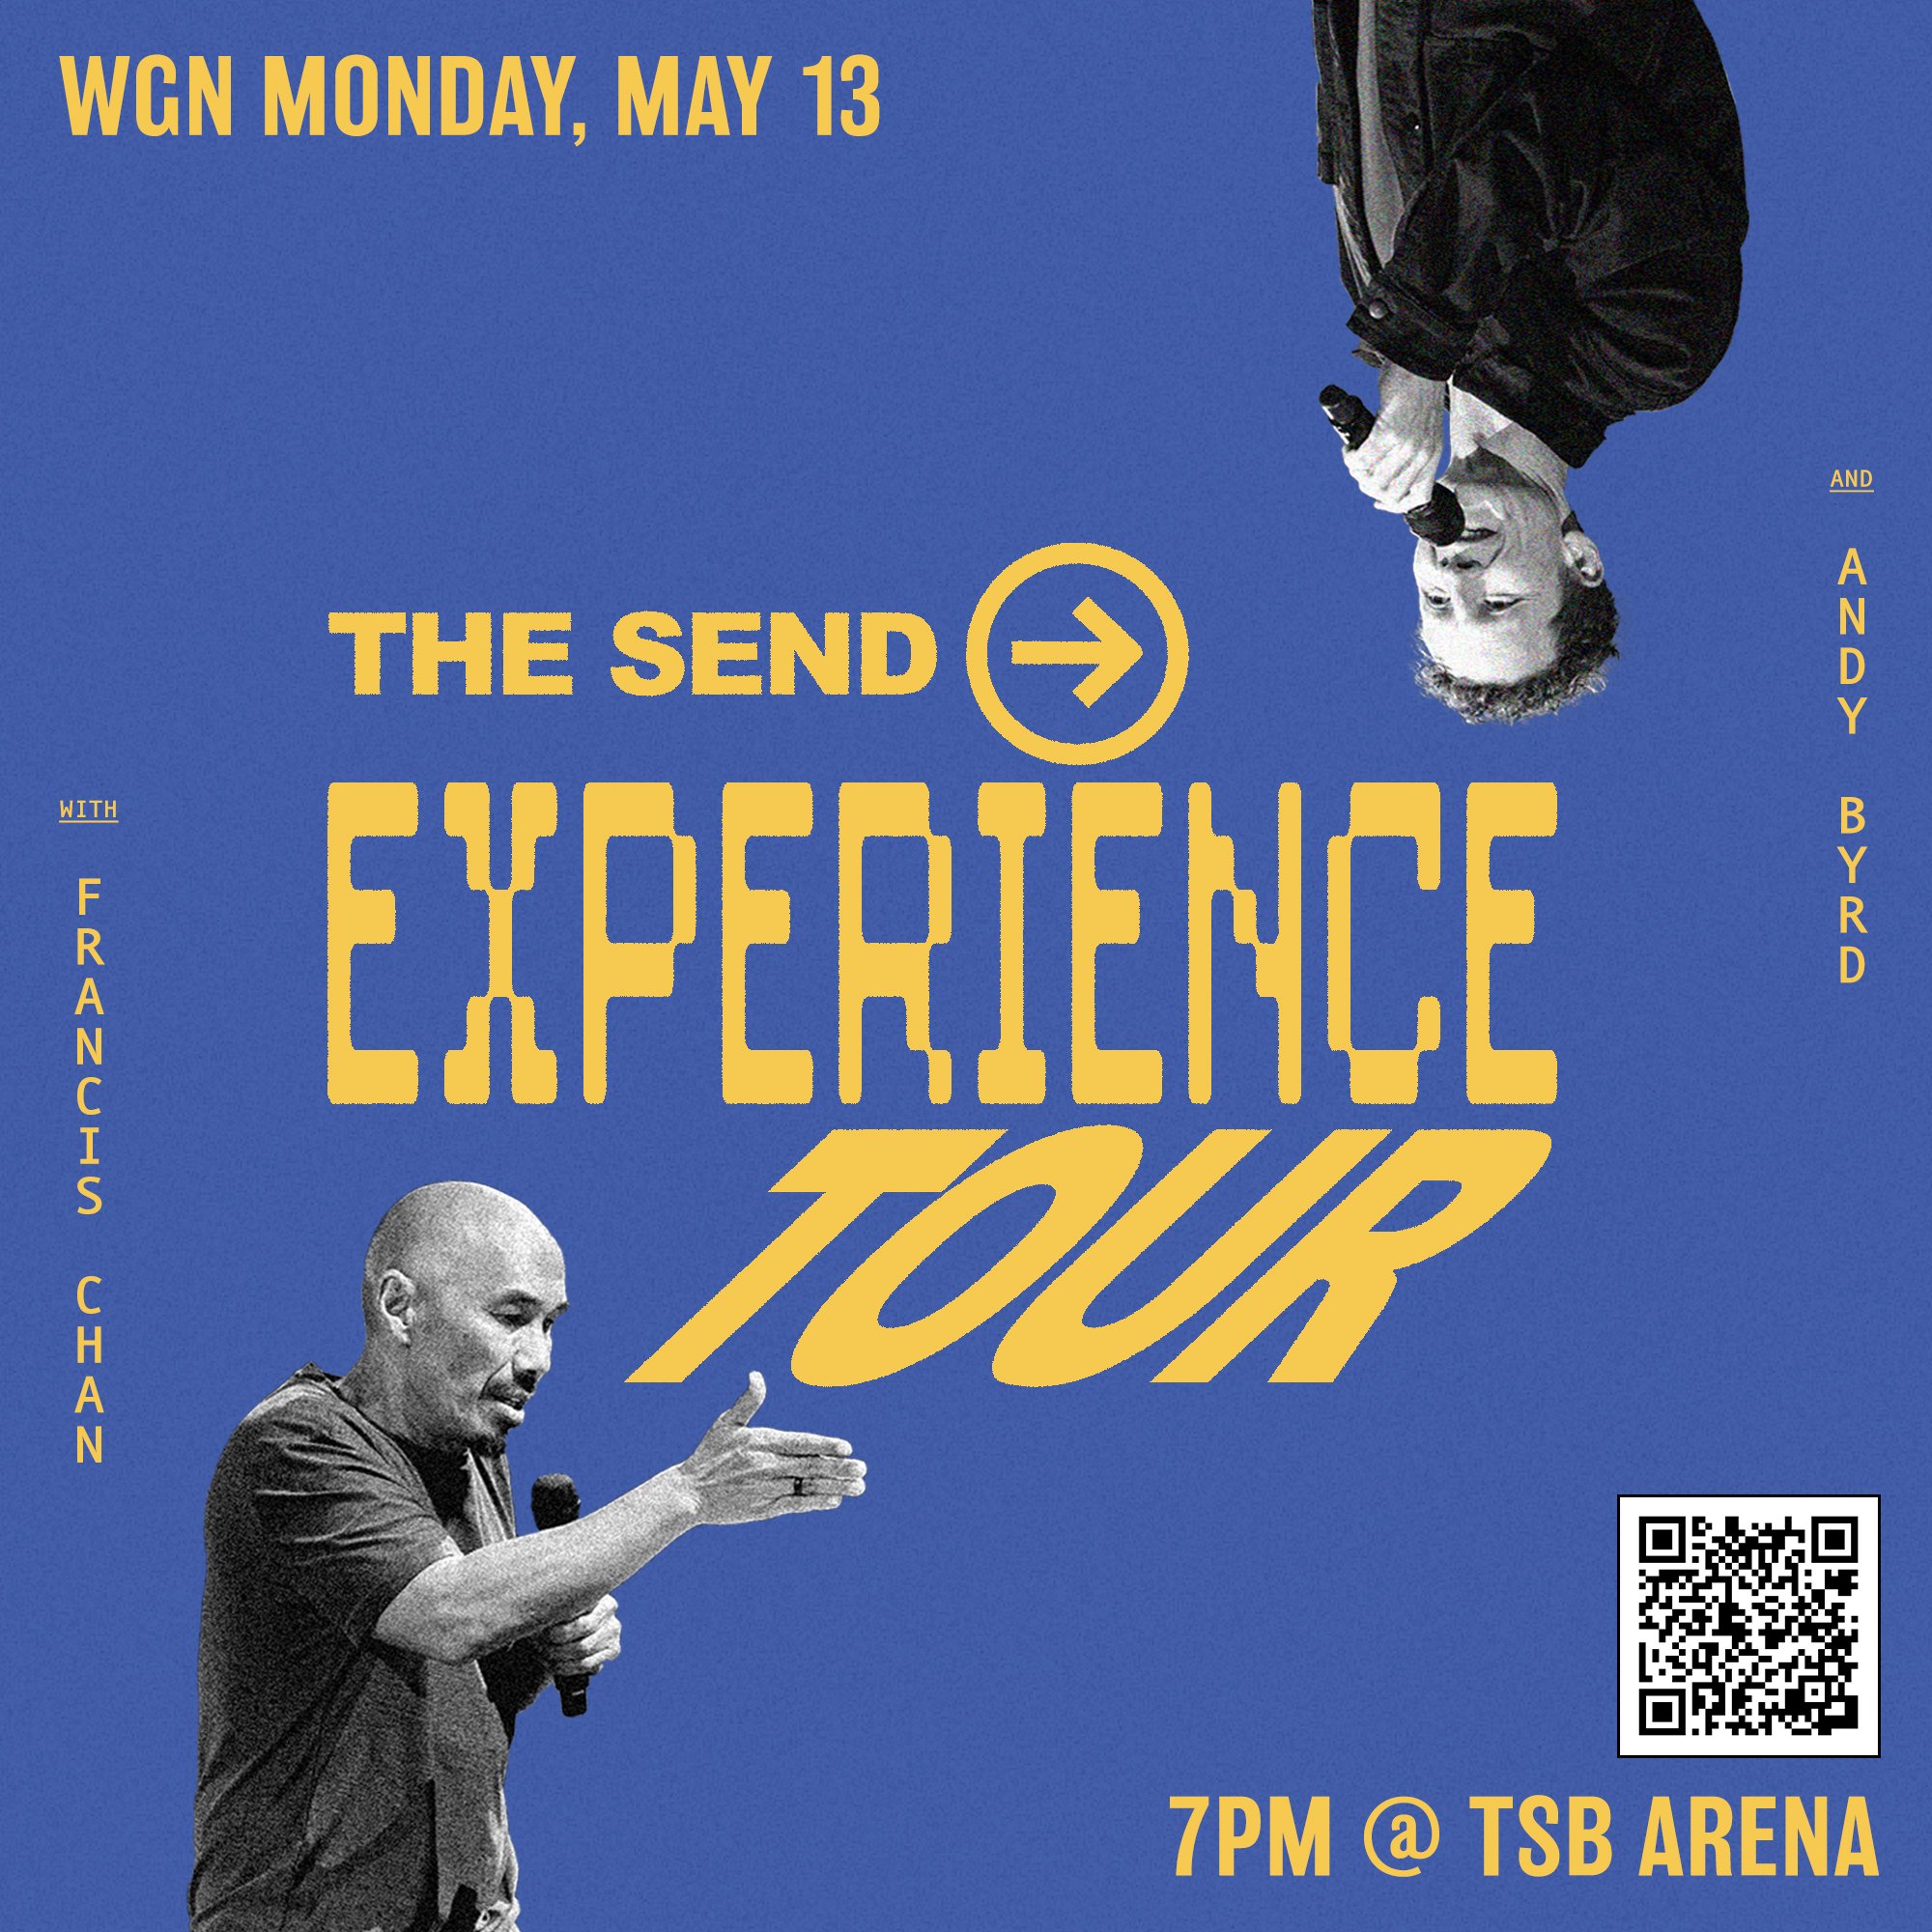 THE SEND
13 May - 7pm TSB Arena

Sign up through our website ($2 tickets): https://www.thestreet.org.nz/

The vision of The Send is to see every believer activated into their missional and evangelistic calling. The Send are running events all around 